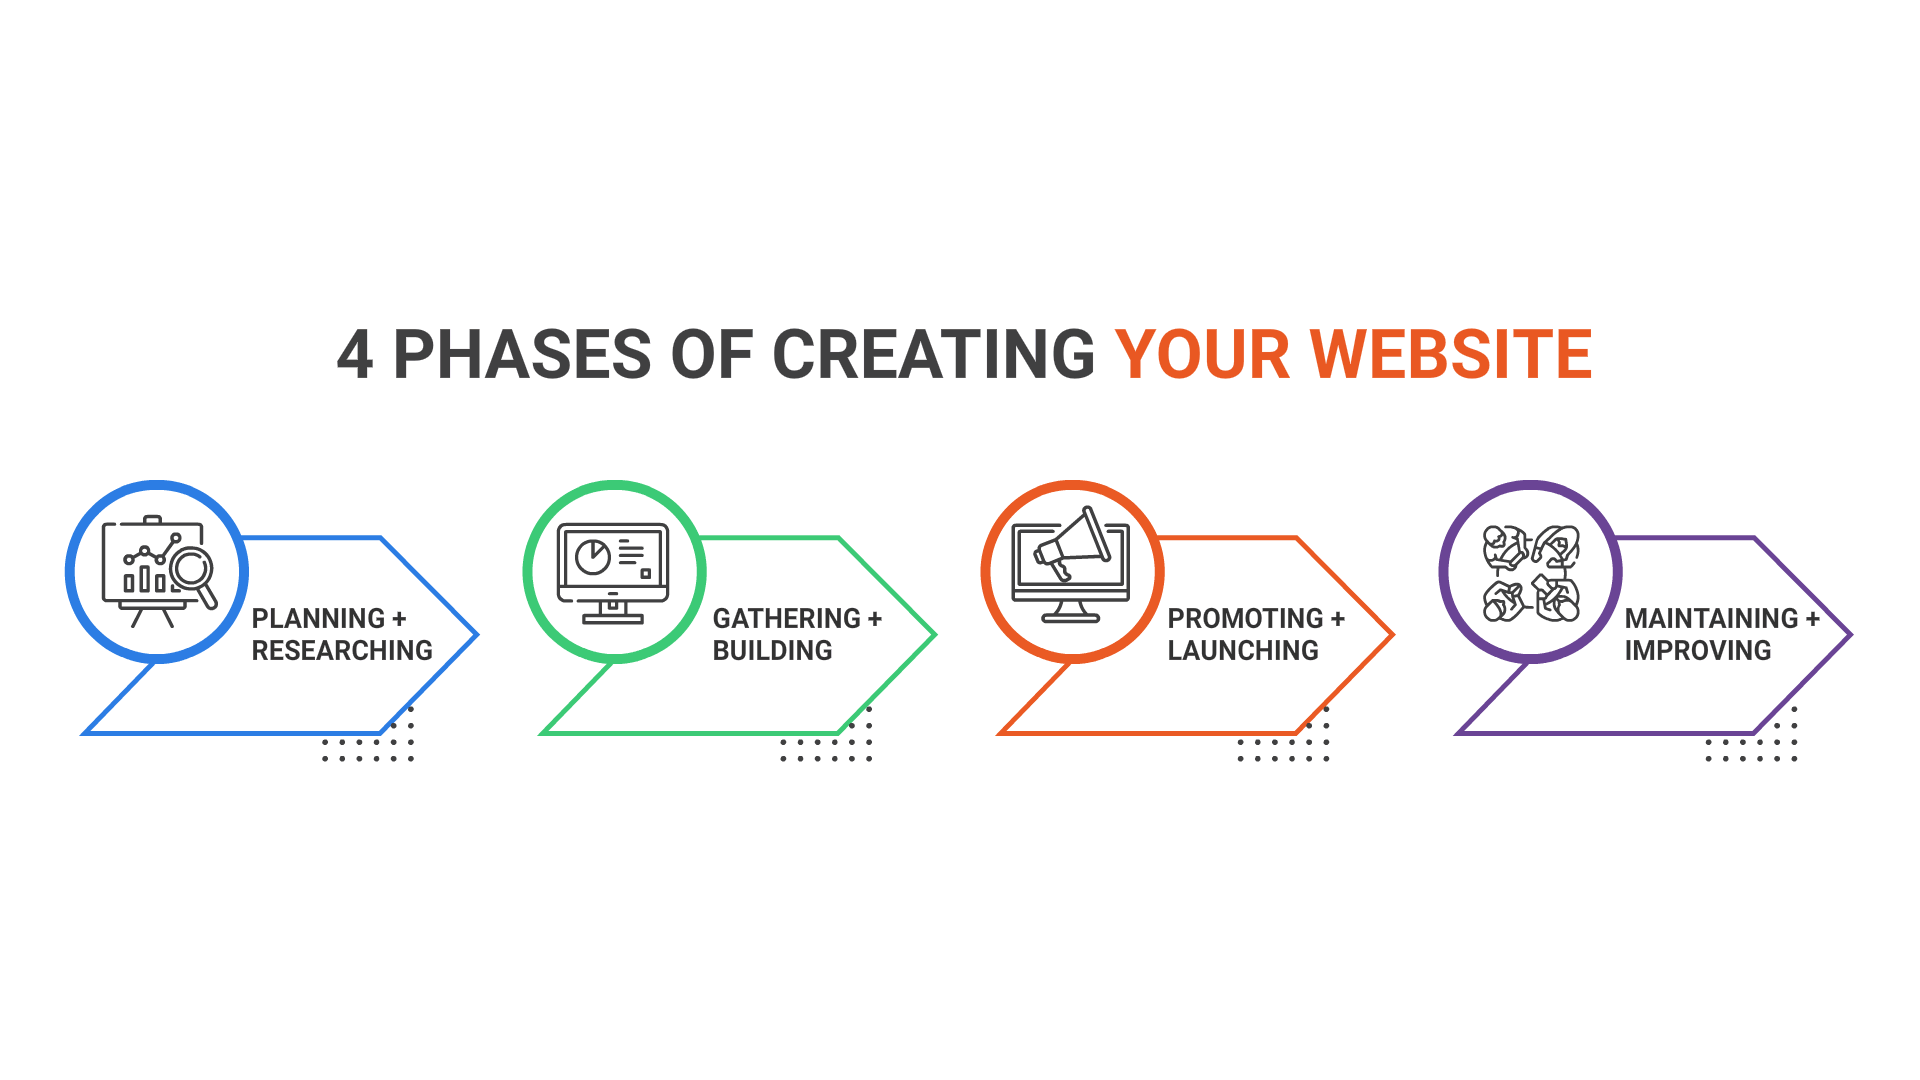 4 Phases of Creating Your Website